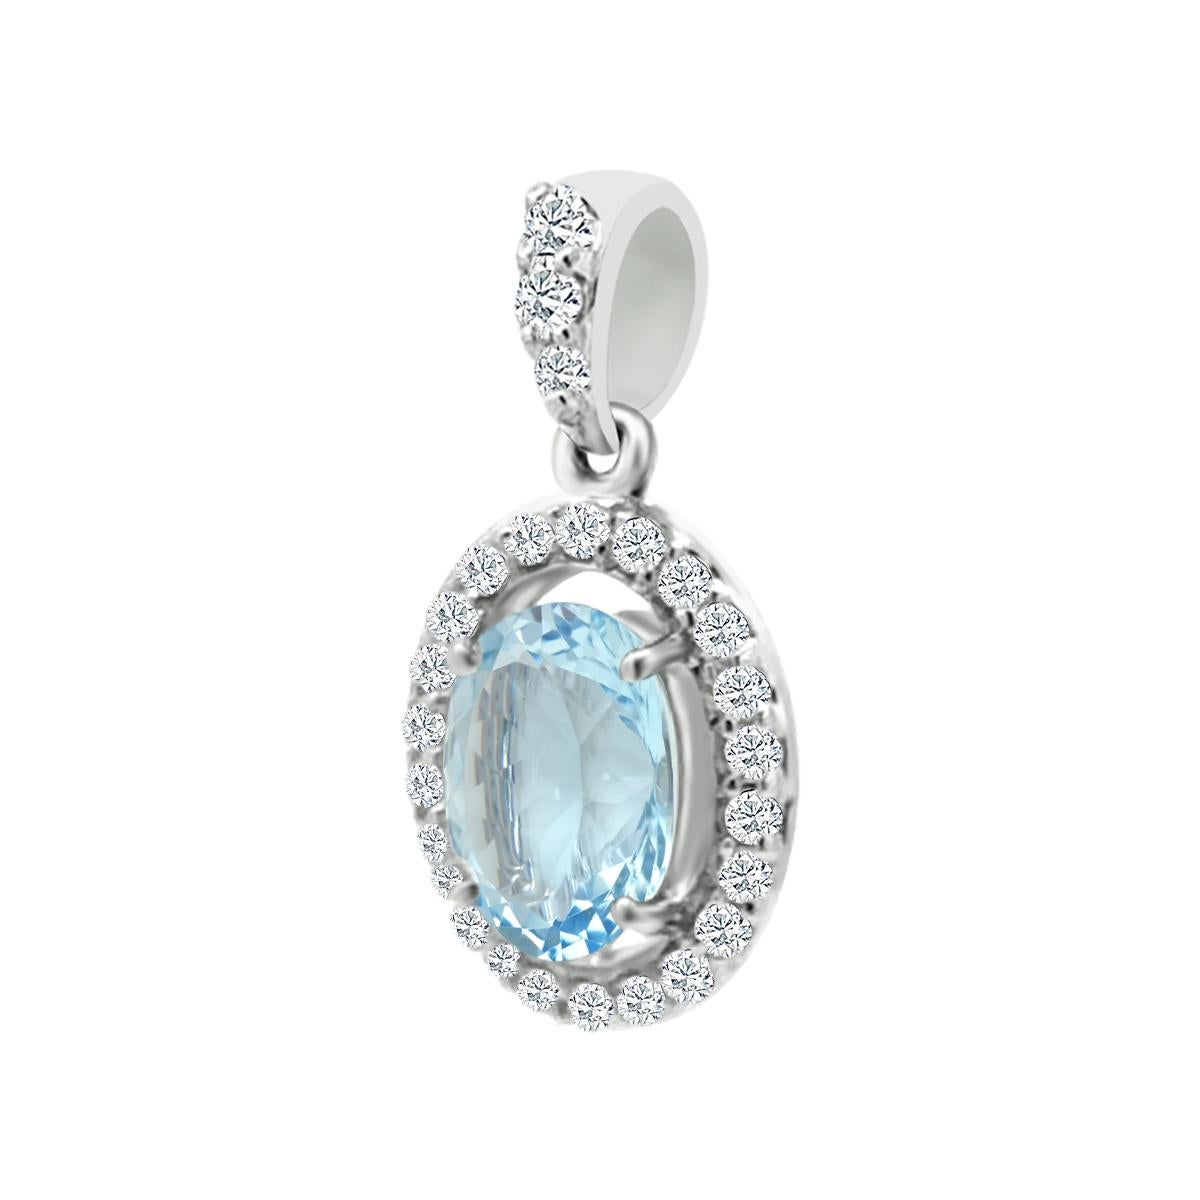 Sit Back And Let This Breathtaking Pendant Make A Memorable Statement For You!
Centered By A Oval 7x5mm Aquamarine Gemstone Illuminated By Halo Brilliant Cut Diamonds Set In 14k White Gold.
The Ethereal Design Will Evoke Gasps From Near And